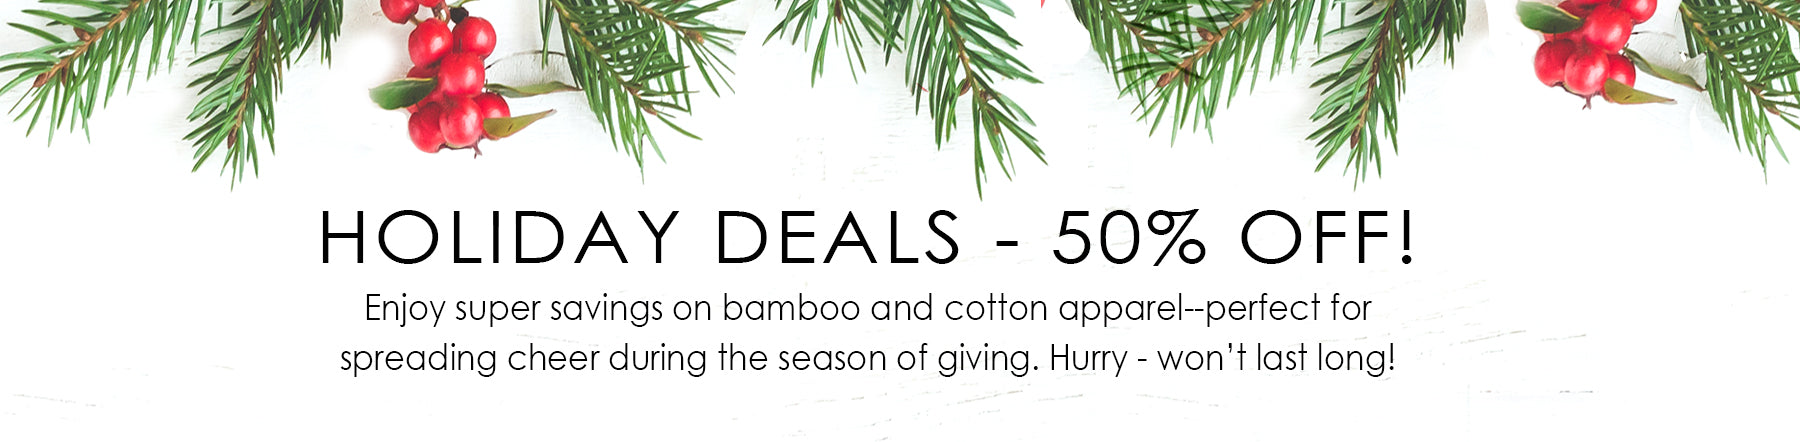 HOLIDAY DEALS 50% OFF